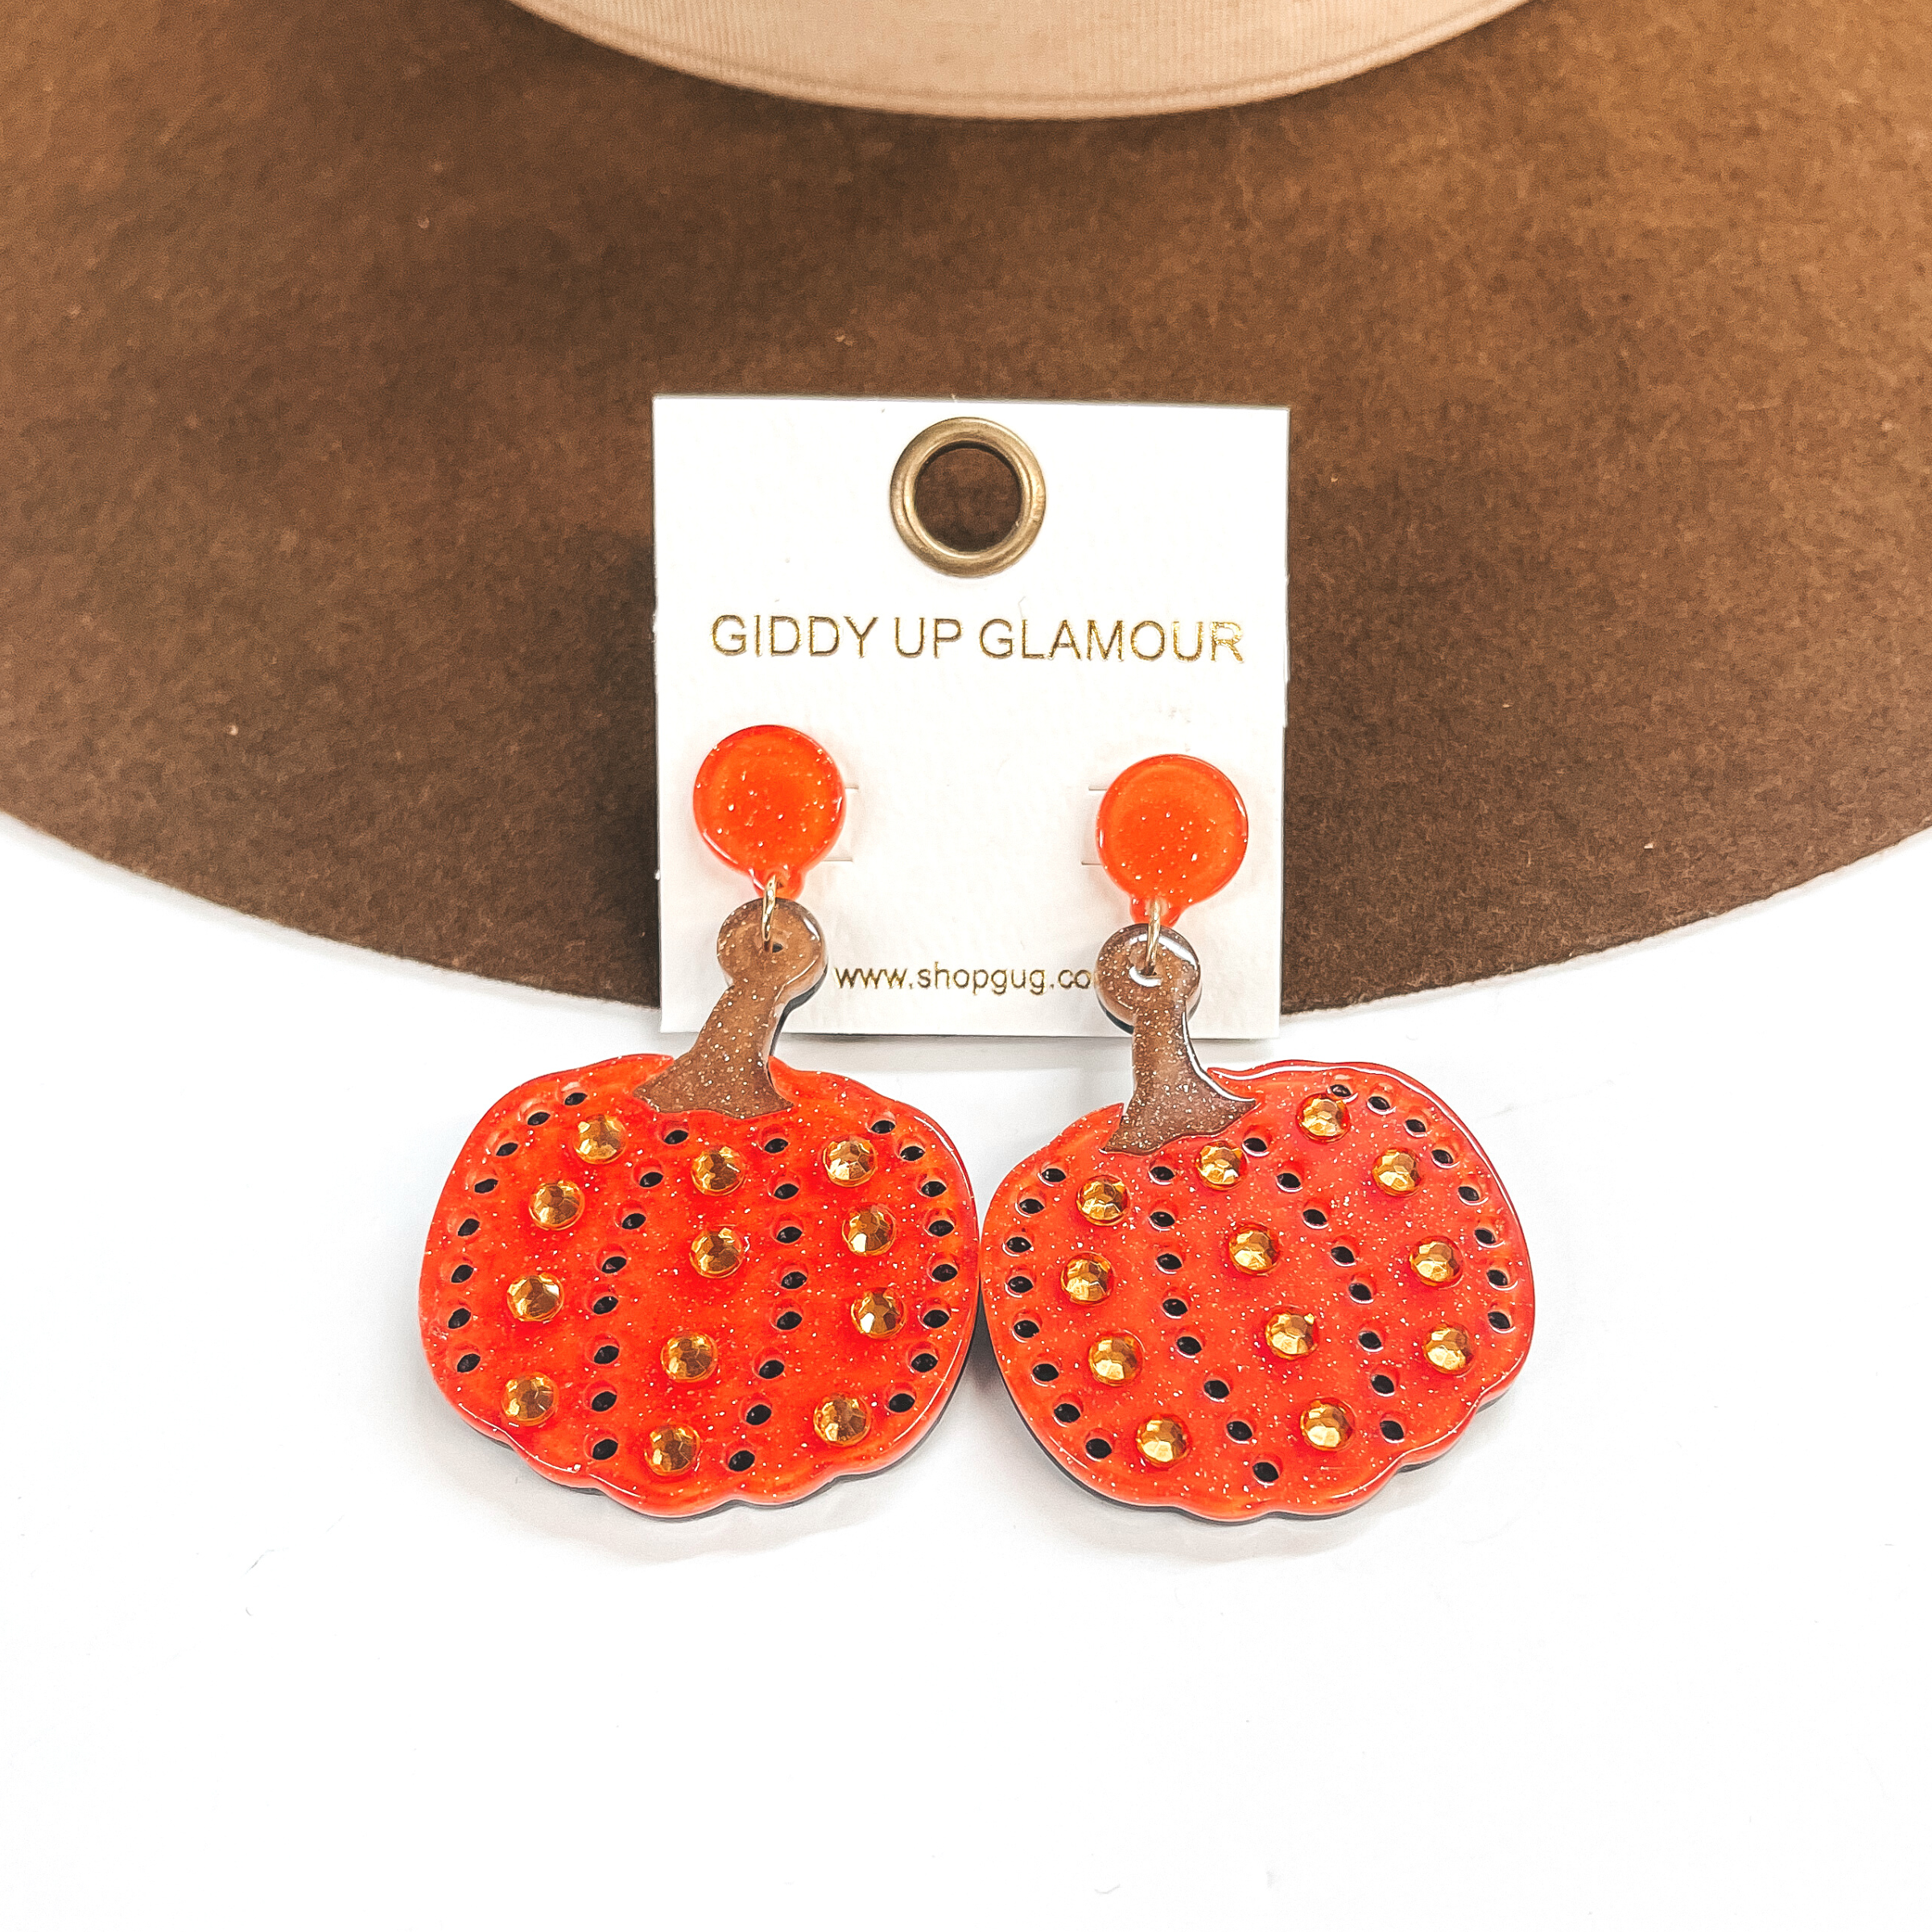 Pictured on a white and brown background are acrylic, orange glitter pumpkin earrings. These earrings include holes as and crystals as detailing.